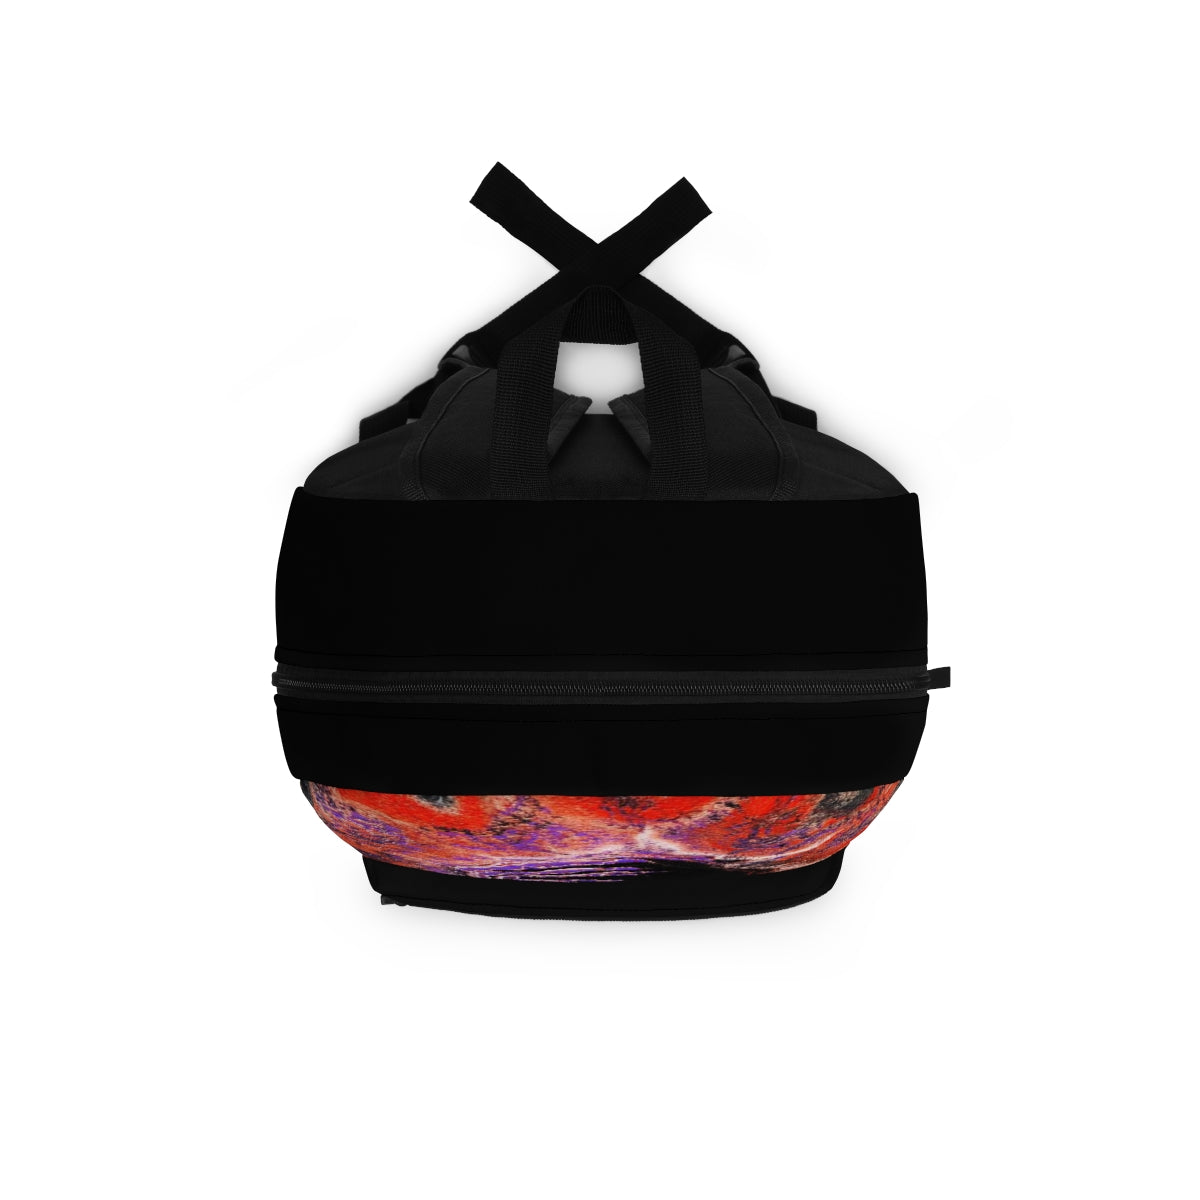 Black Hole Backpack (Made in USA)